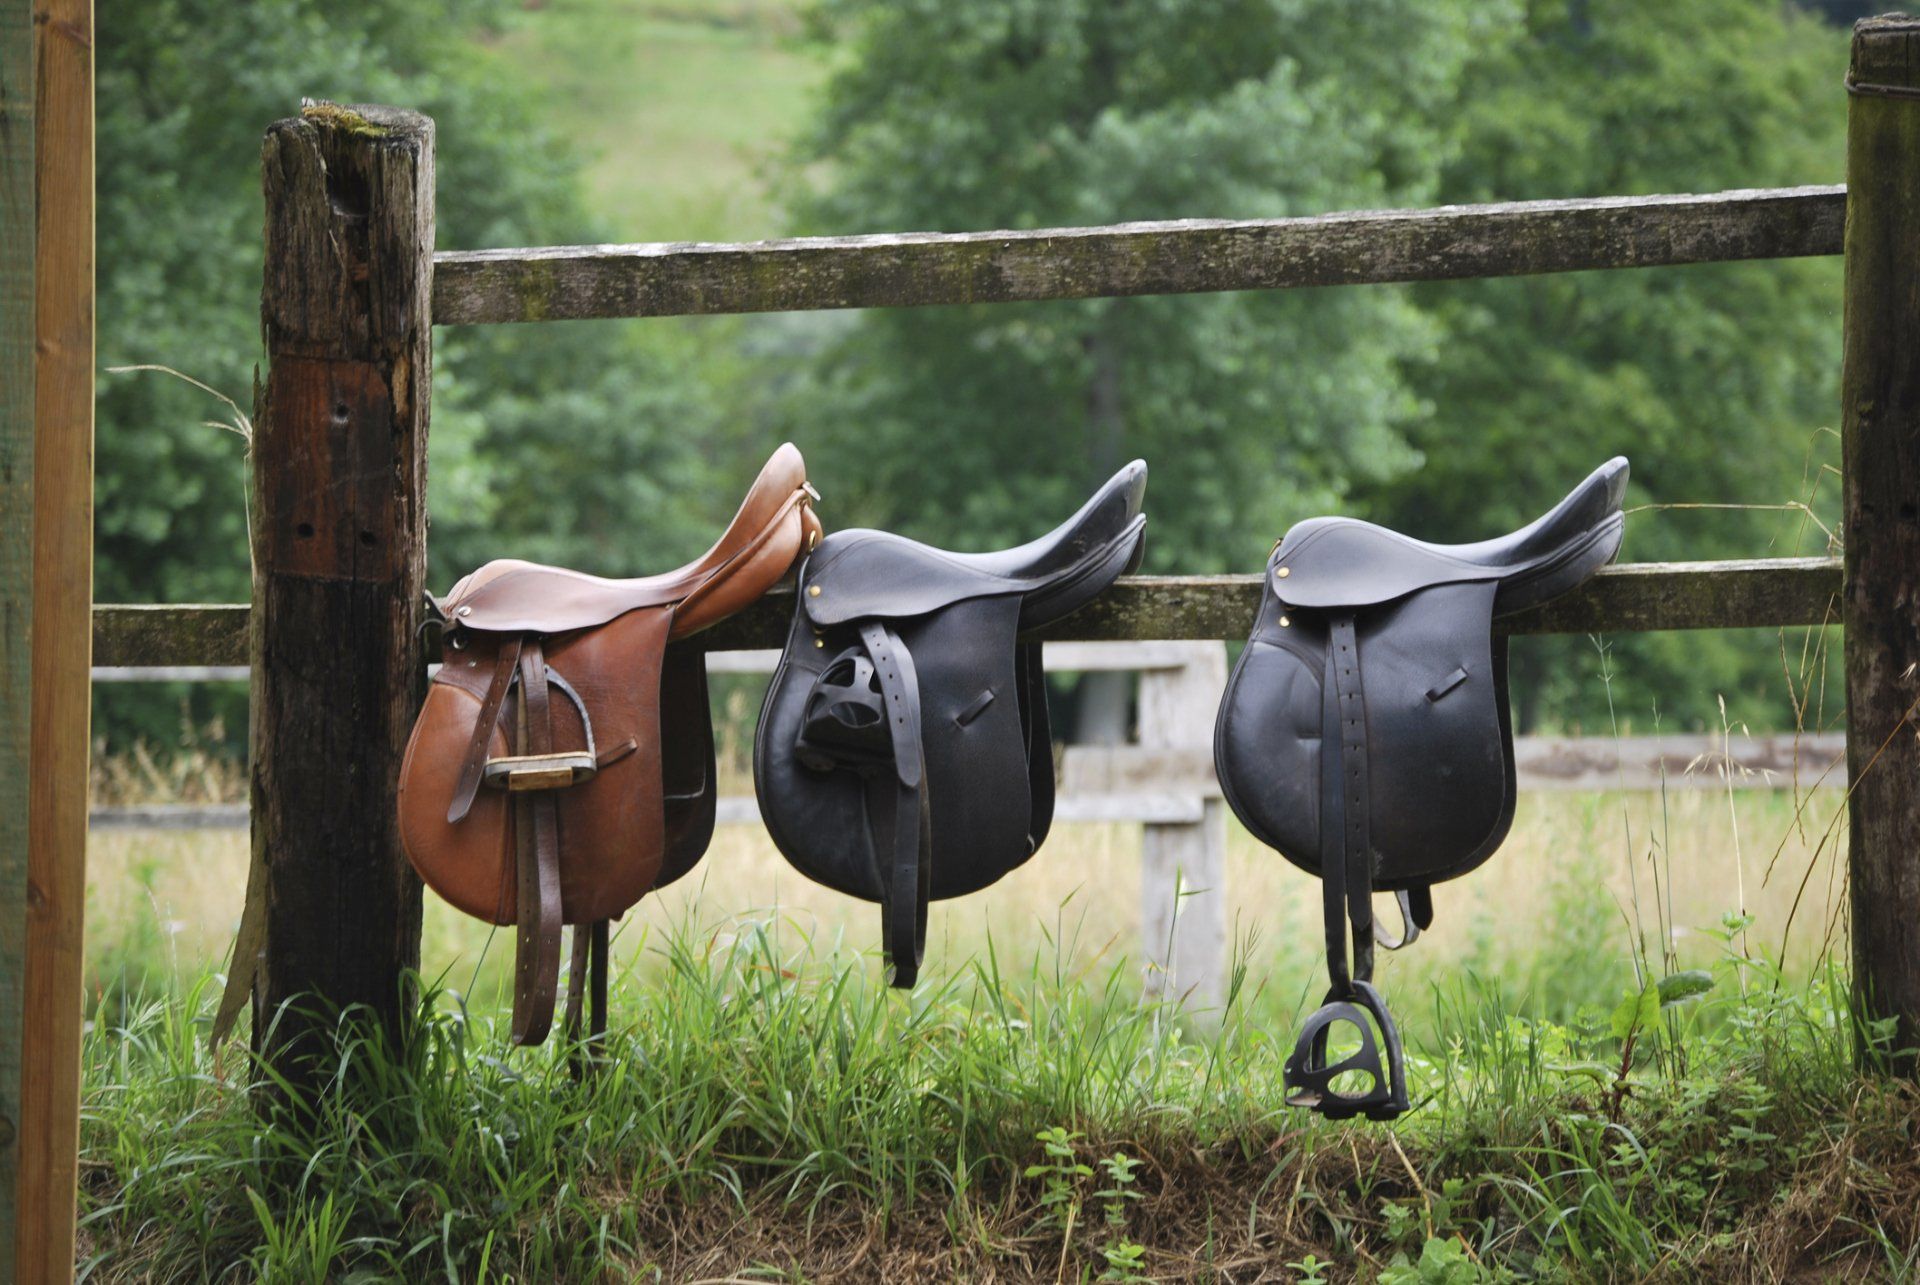 Saddle fit will guide you to choose the proper fit for your horse.